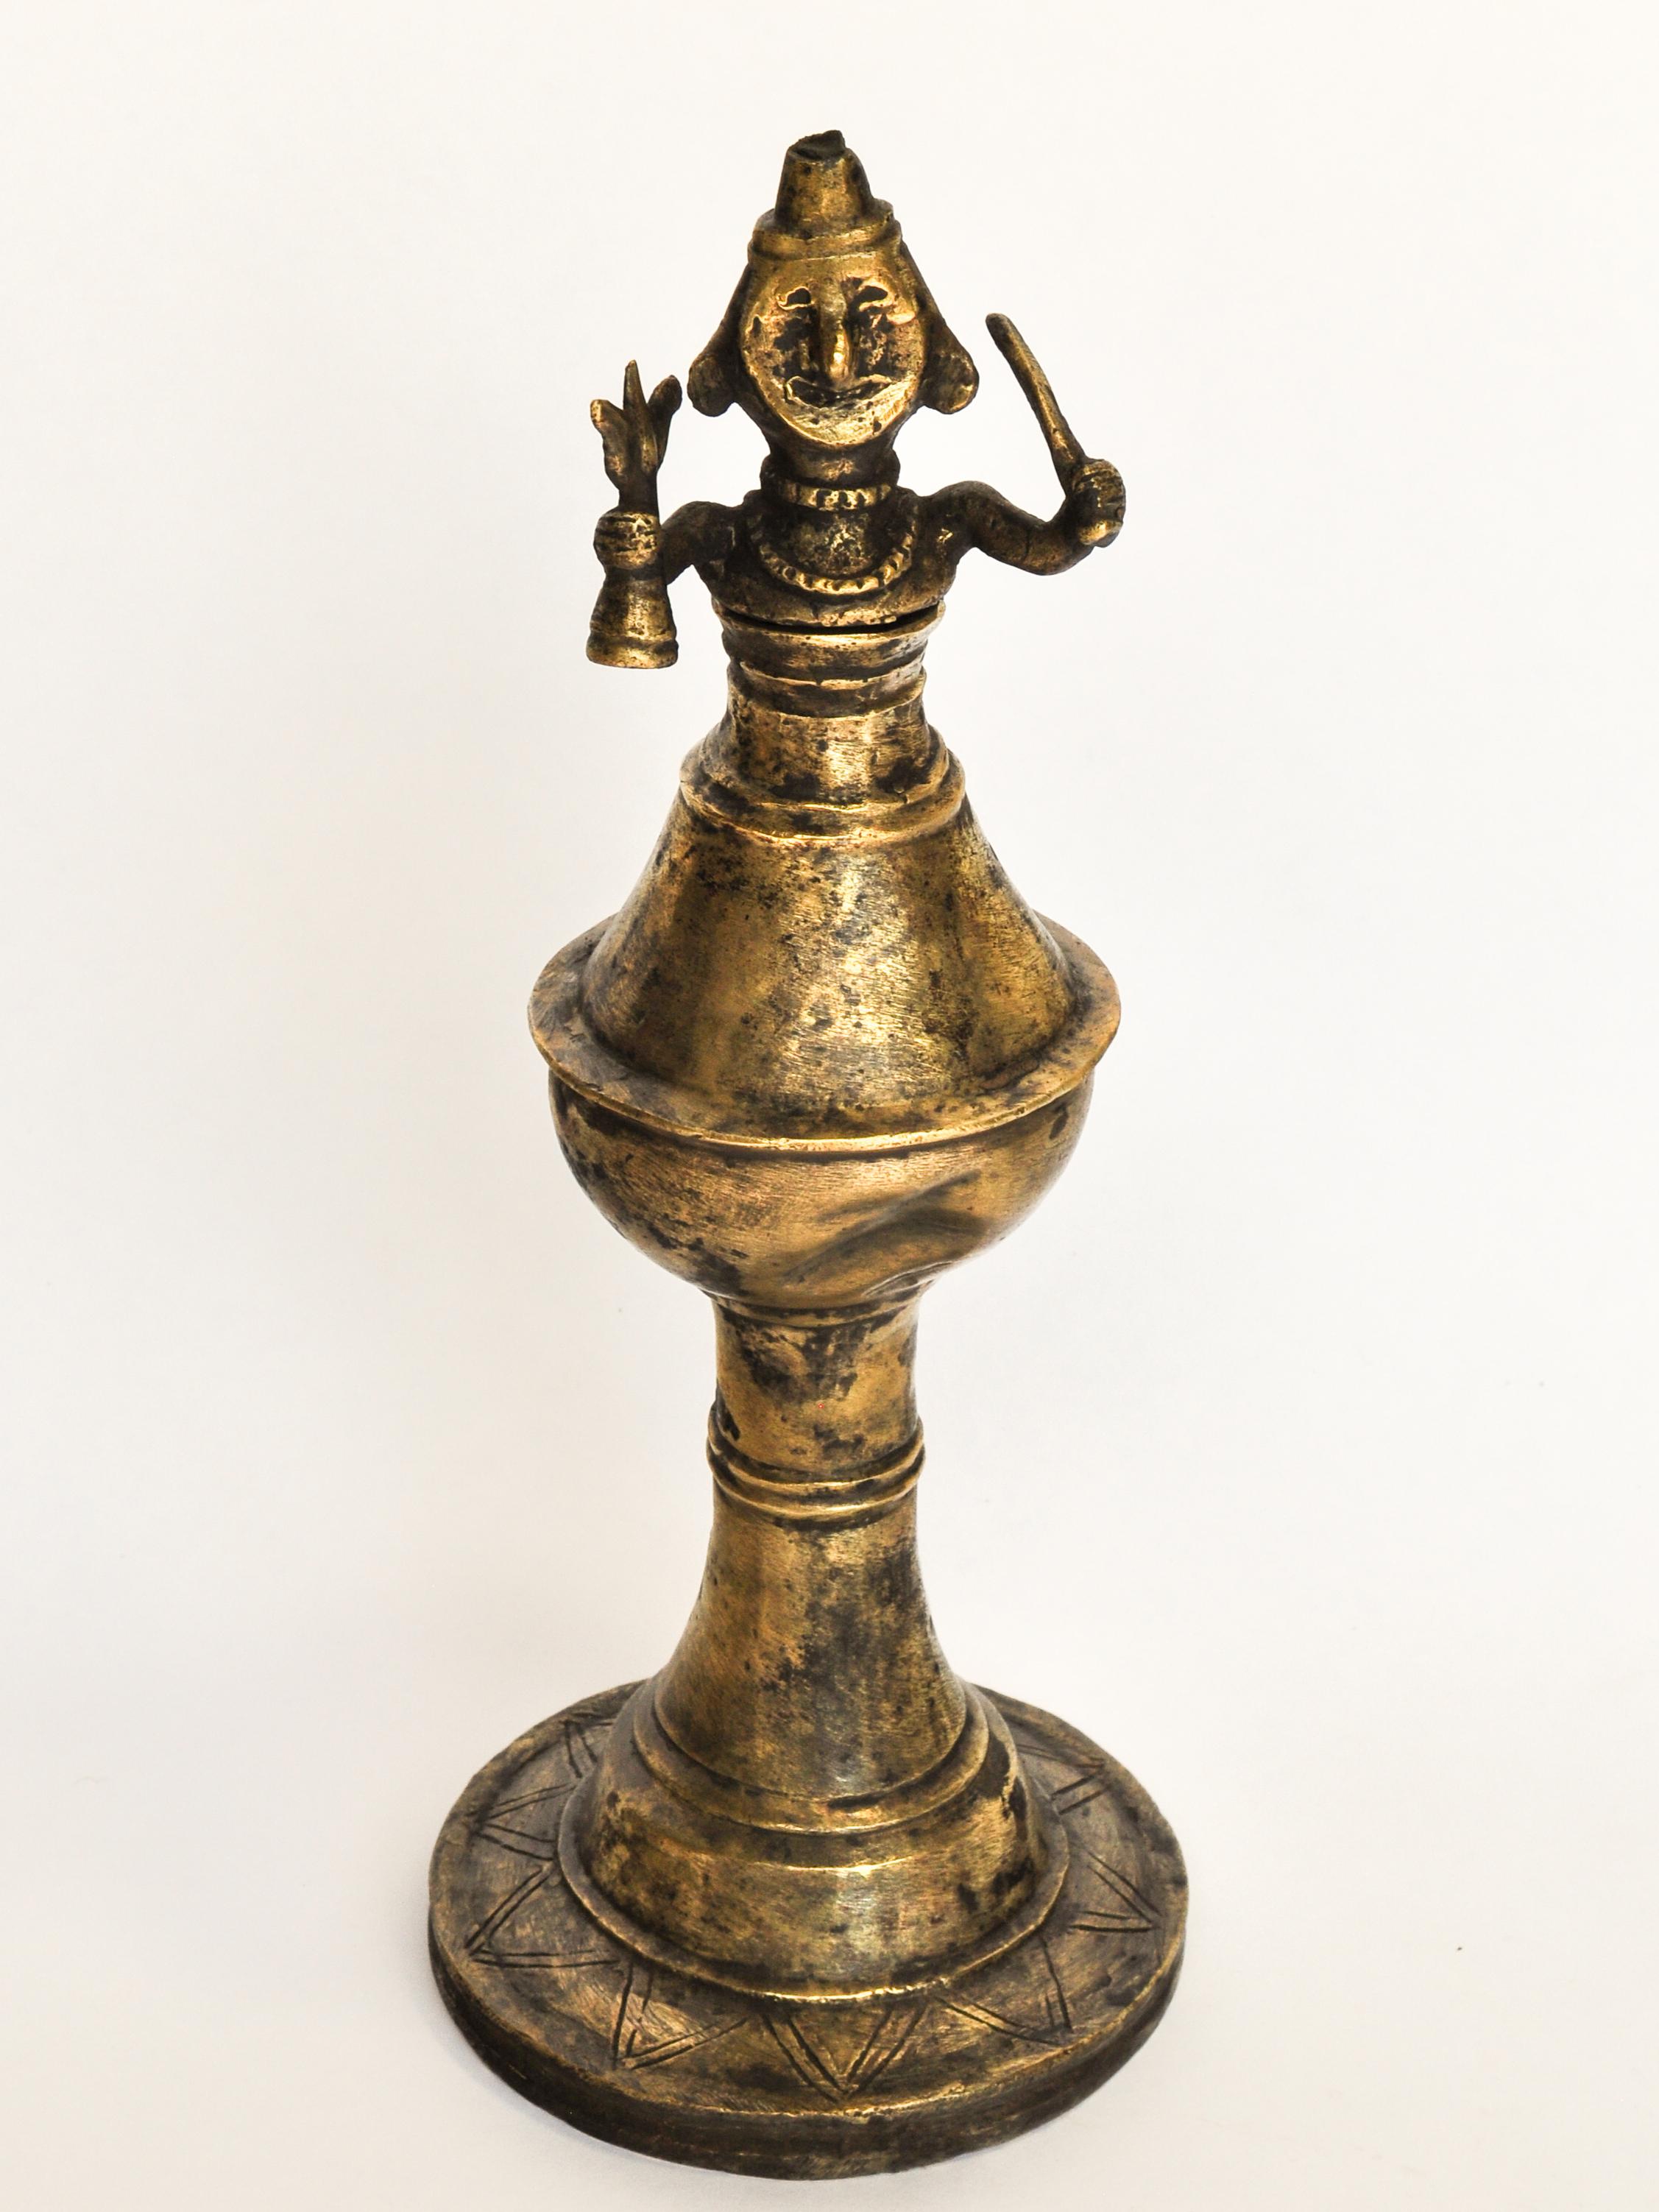 Vintage bronze oil lamp with Shaman figure from West Nepal. Mid-20th Century. 11 inches tall.
This lamp comes from far west Nepal, an off the beaten path area known for its sculptures and cult practices involving shamans and ritualized trance. The